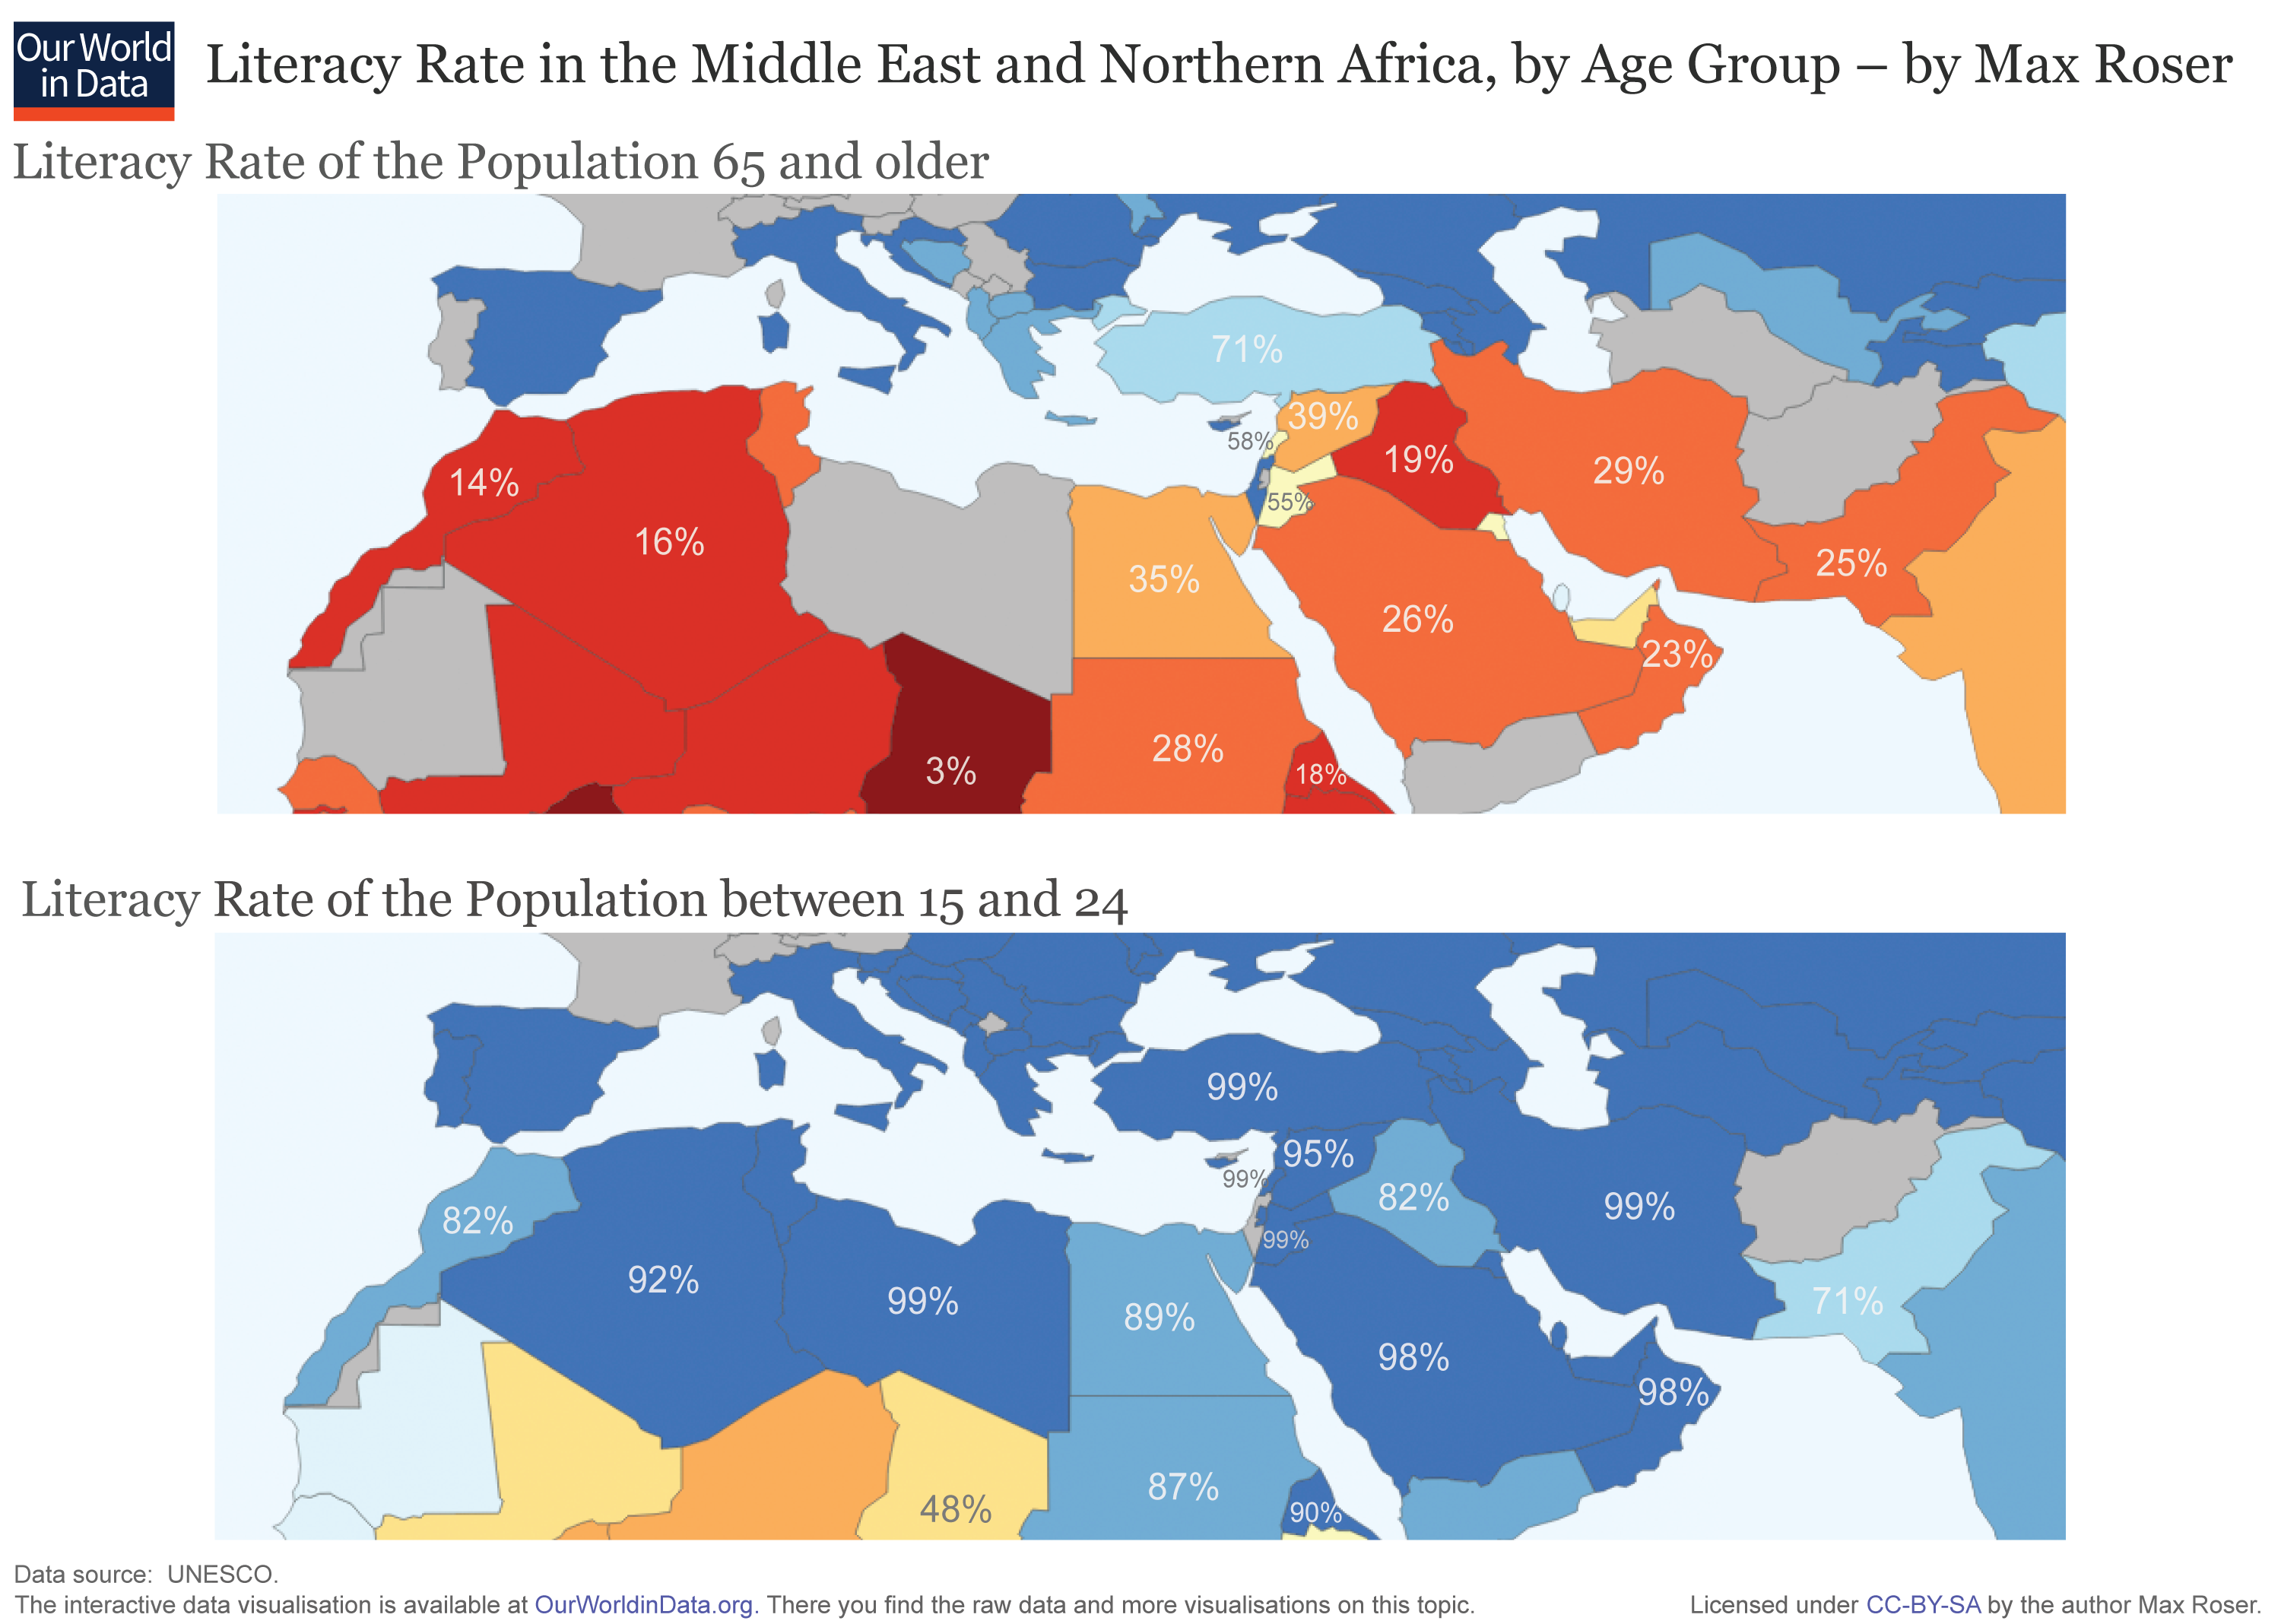 ourworldindata_literacy-rate-by-age-in-middle-east-and-northern-africa.png